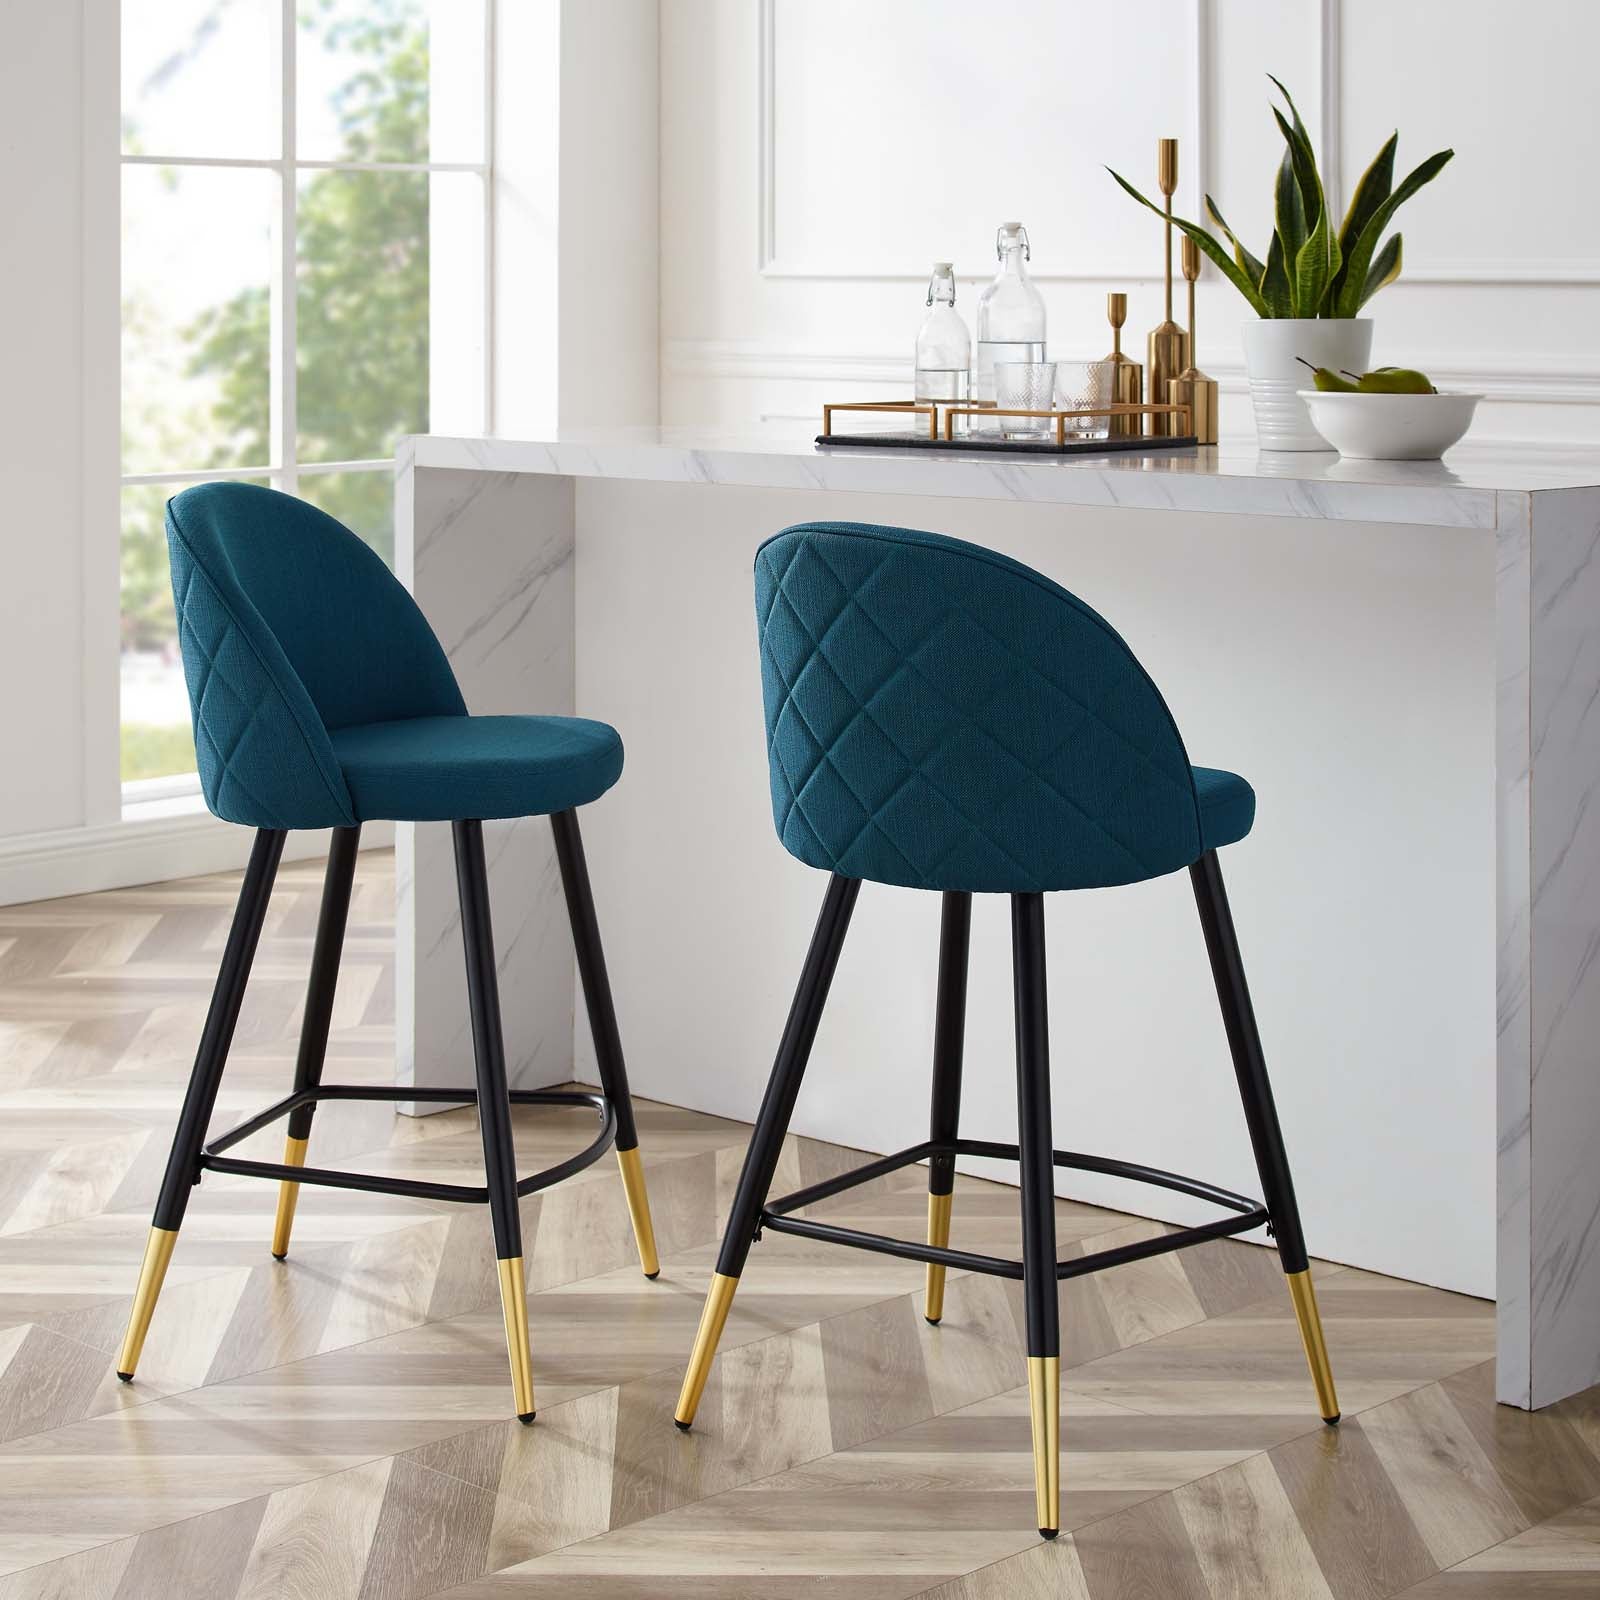 Cordial Fabric Counter Stools - Set of 2